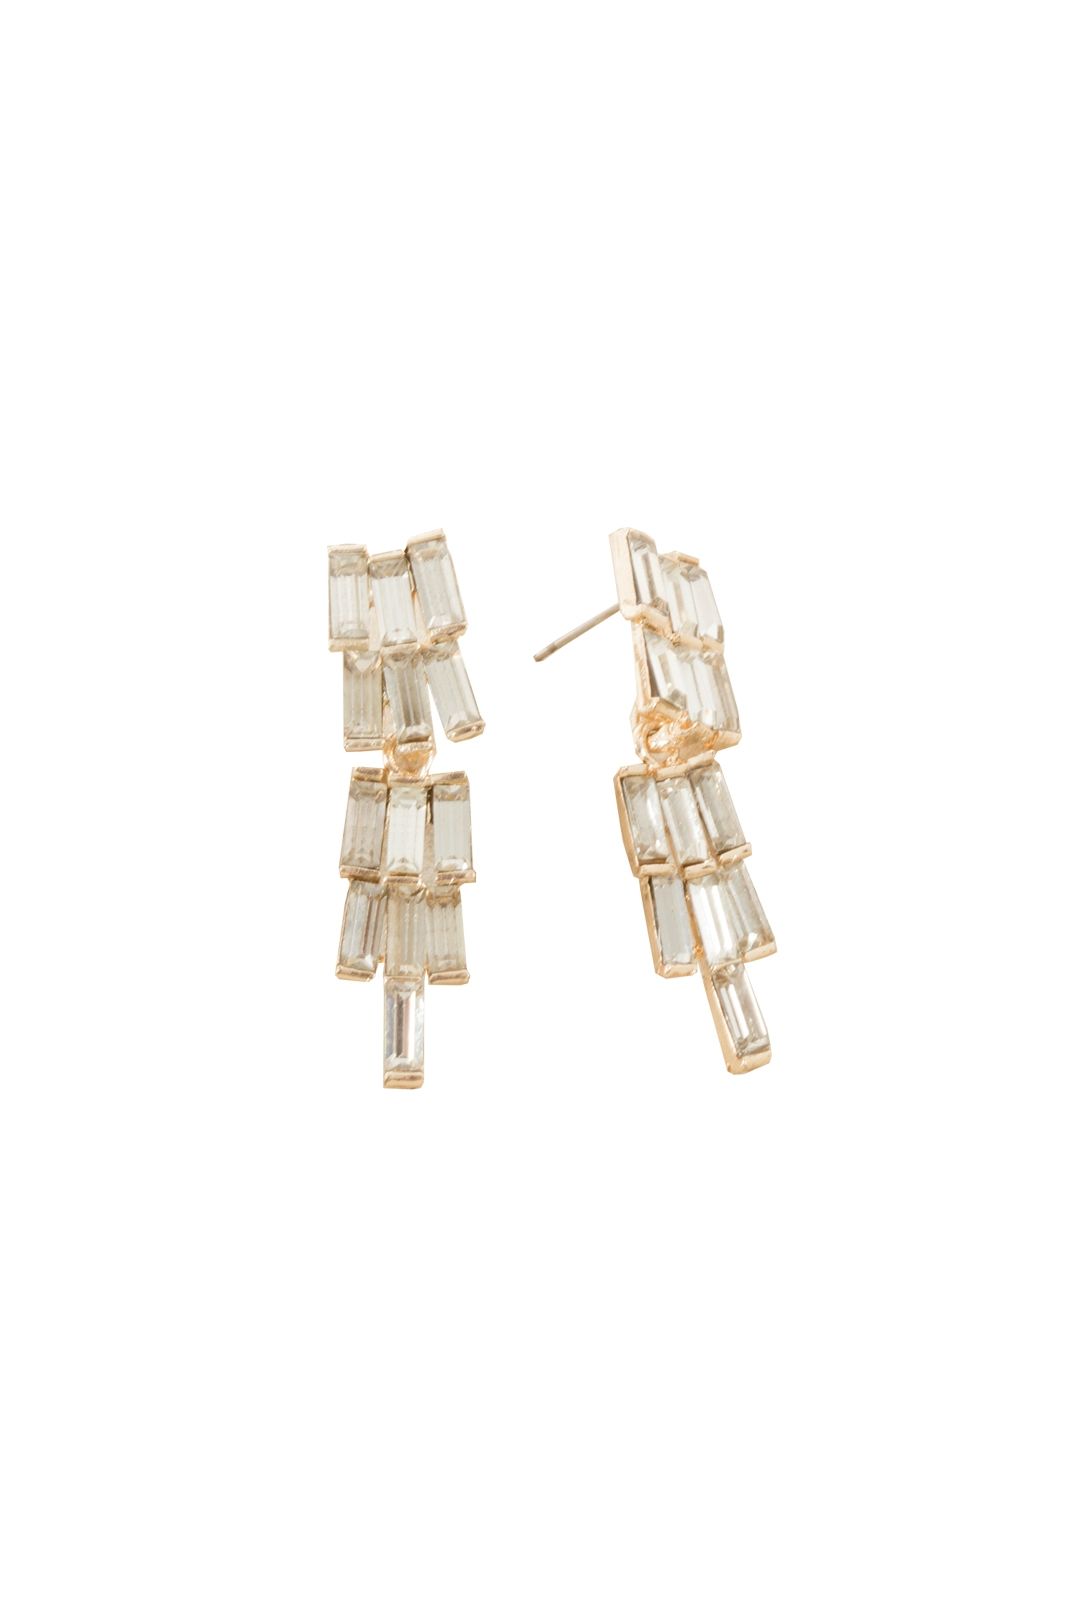 Adorne - Tiered Baguettes Mini Drop Earrings - Crystal Gold - Front